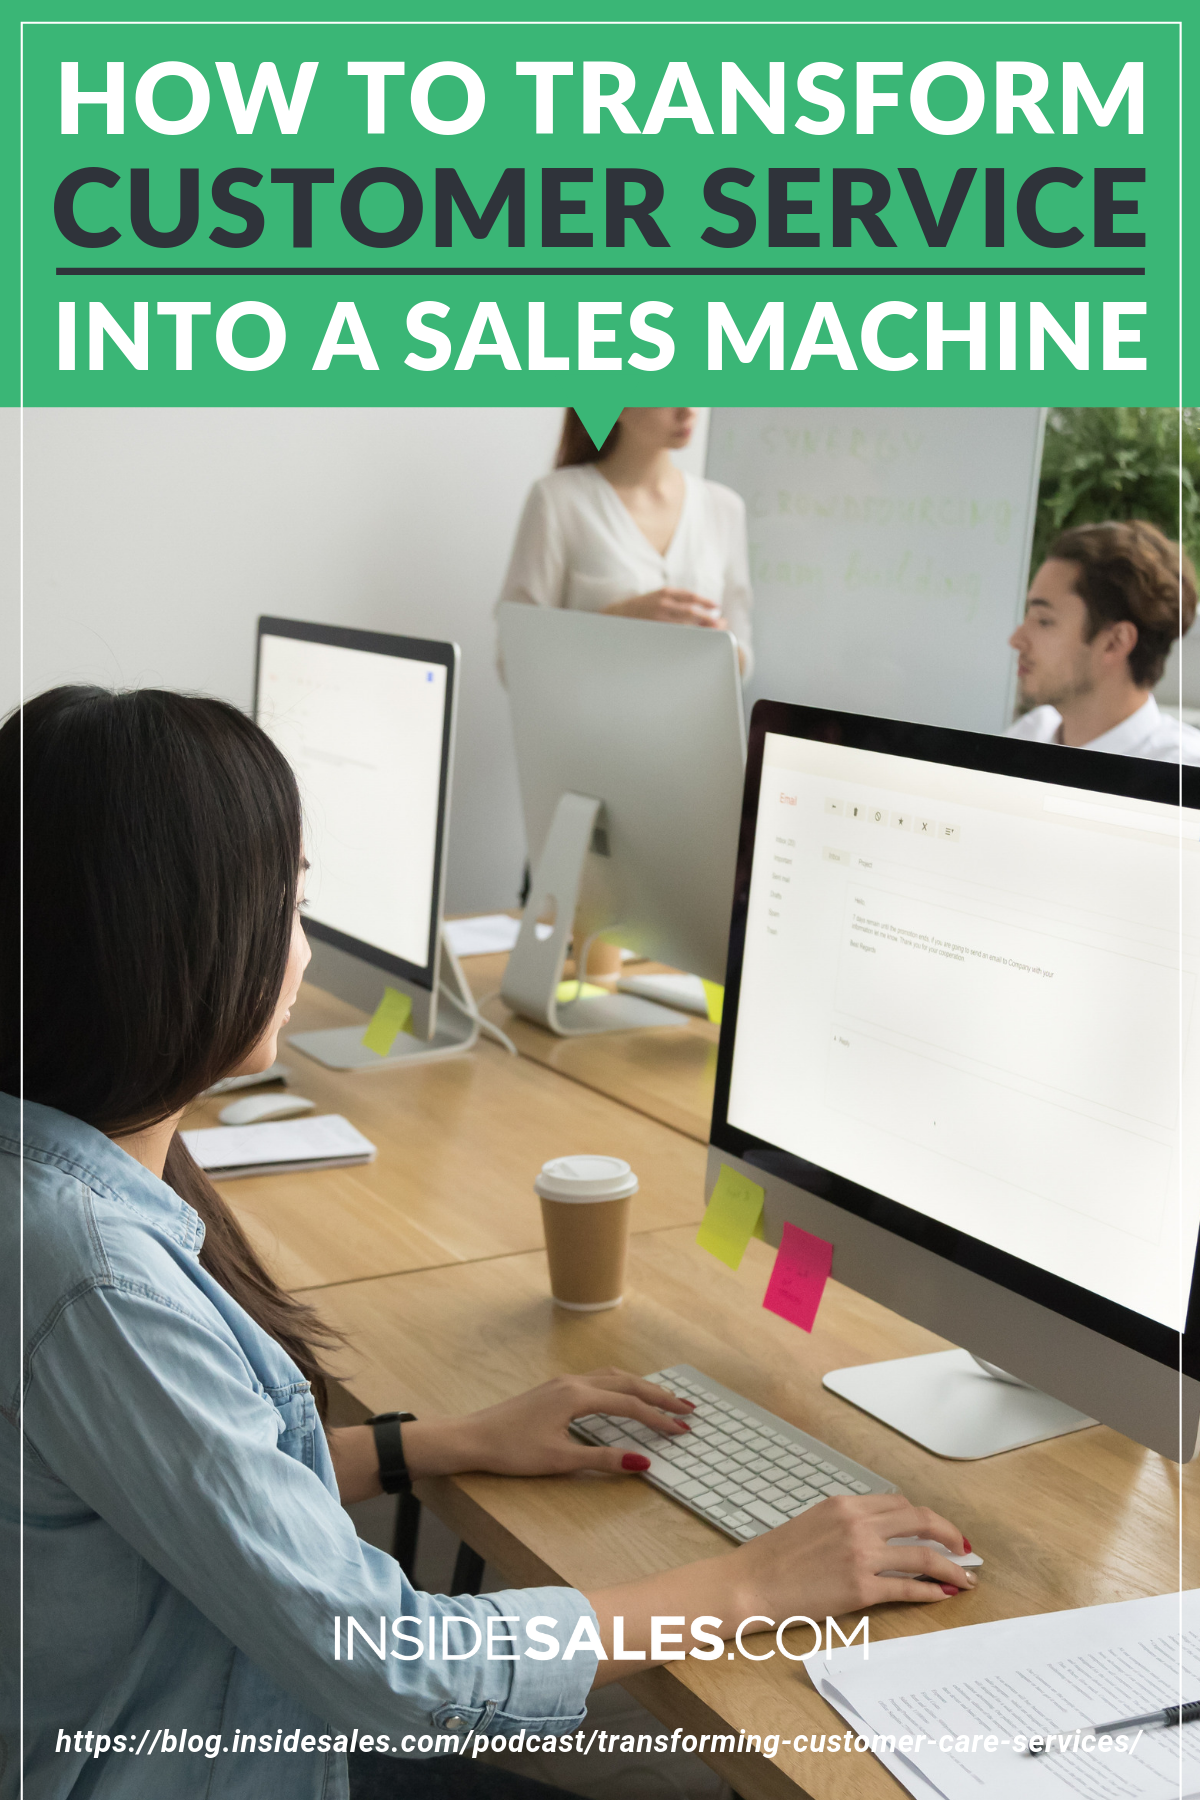 How To Transform Customer Service Into A Sales Machine https://www.insidesales.com/blog/podcast/transforming-customer-care-services/